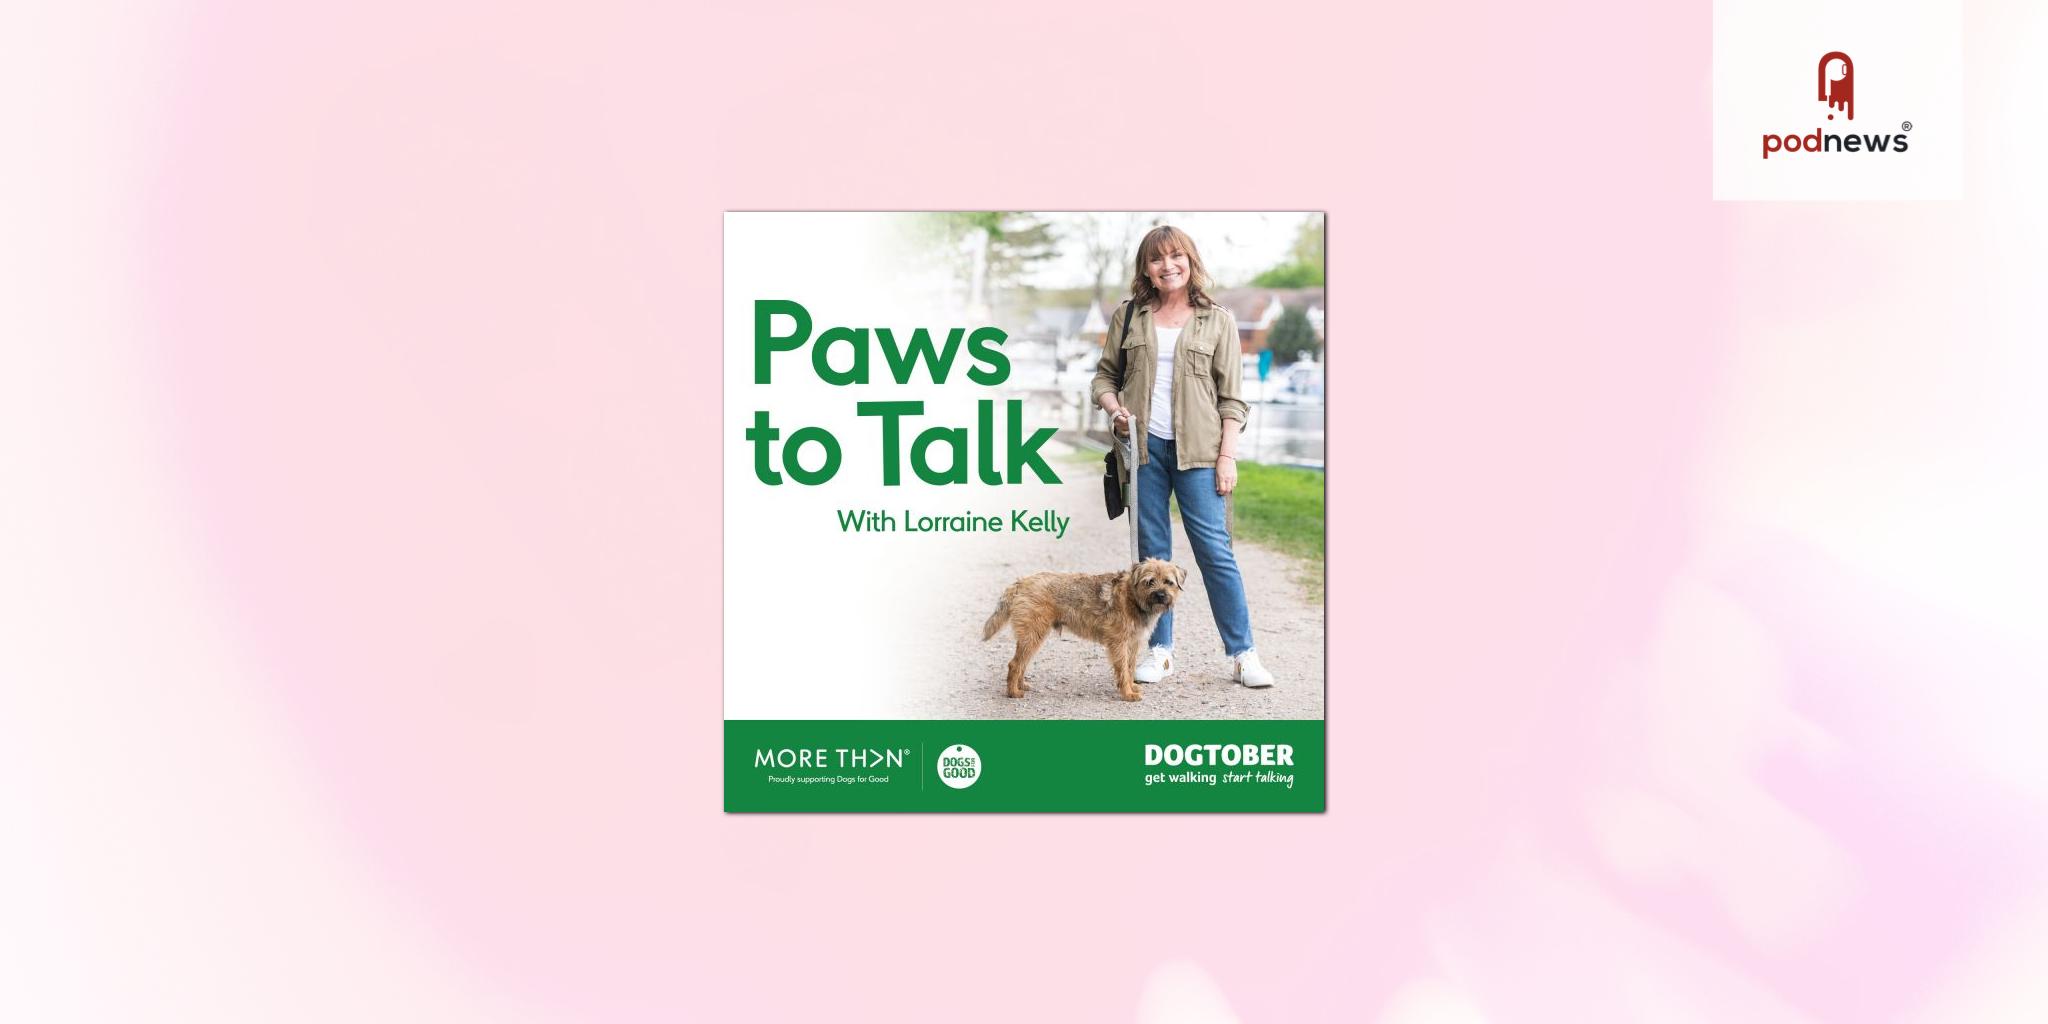 ‘Paws to Talk’ podcast with Lorraine Kelly explores positive influence of dogs on combatting social isolation